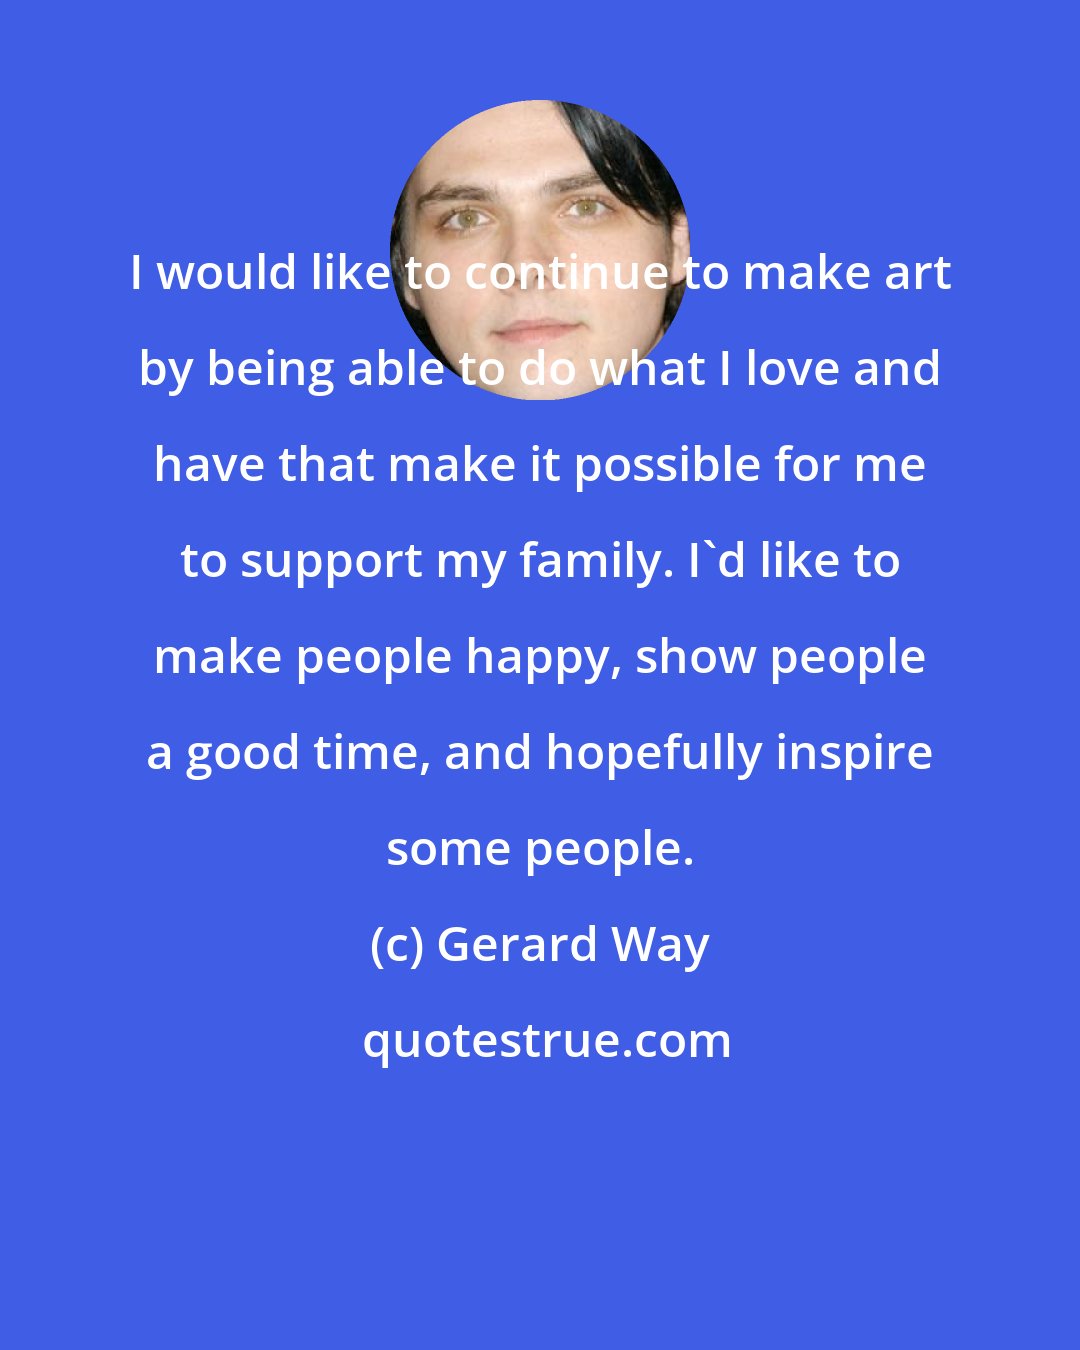 Gerard Way: I would like to continue to make art by being able to do what I love and have that make it possible for me to support my family. I'd like to make people happy, show people a good time, and hopefully inspire some people.